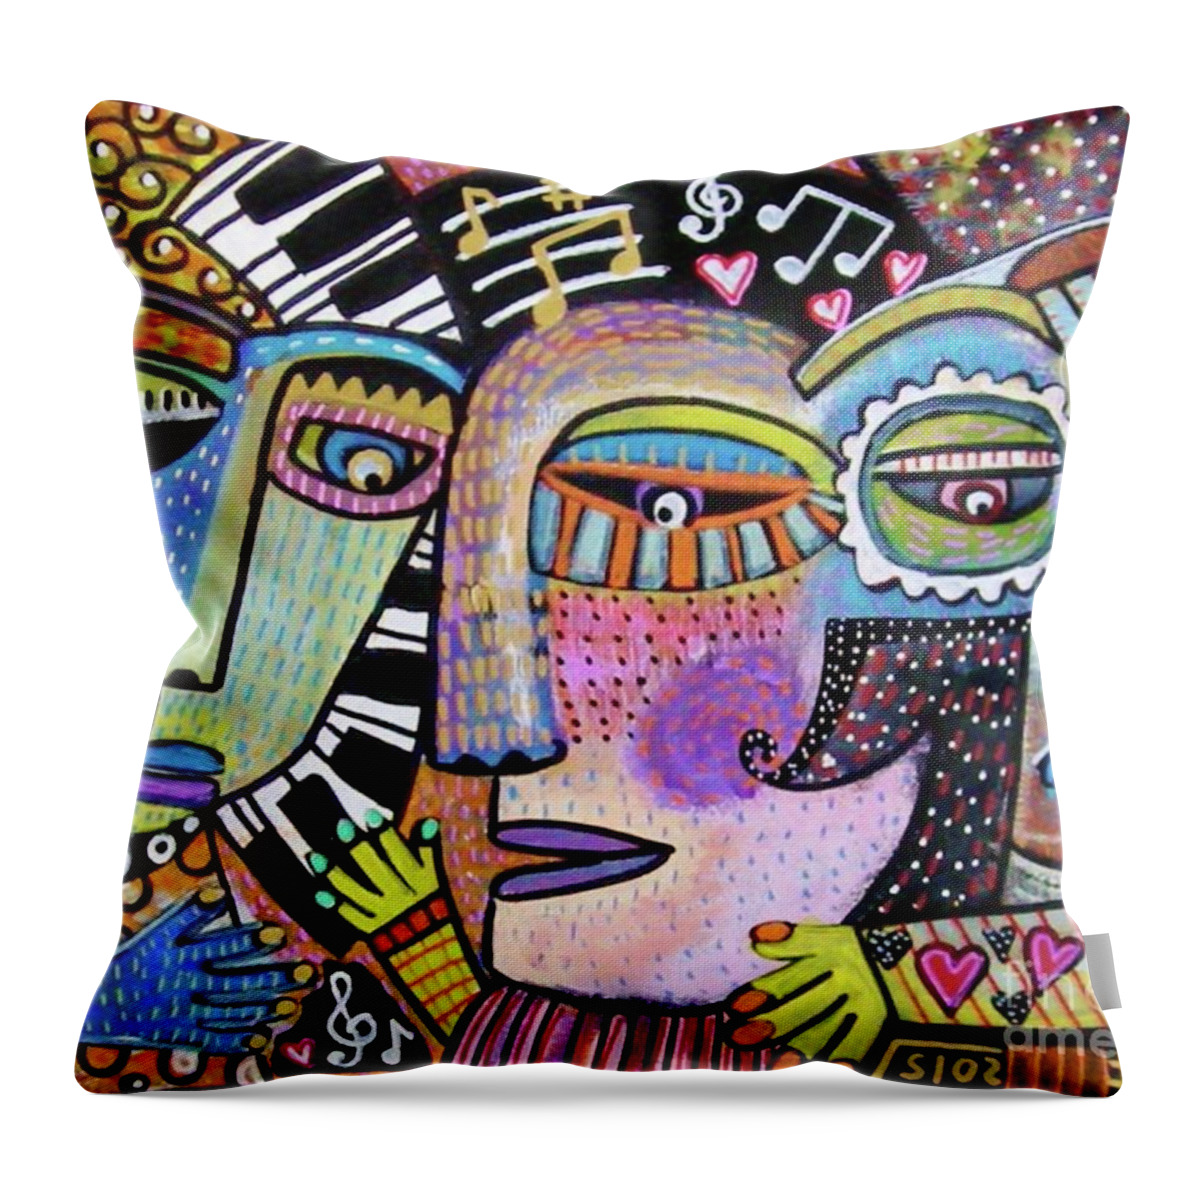 Wine Throw Pillow featuring the painting Piano Bar Singer by Sandra Silberzweig